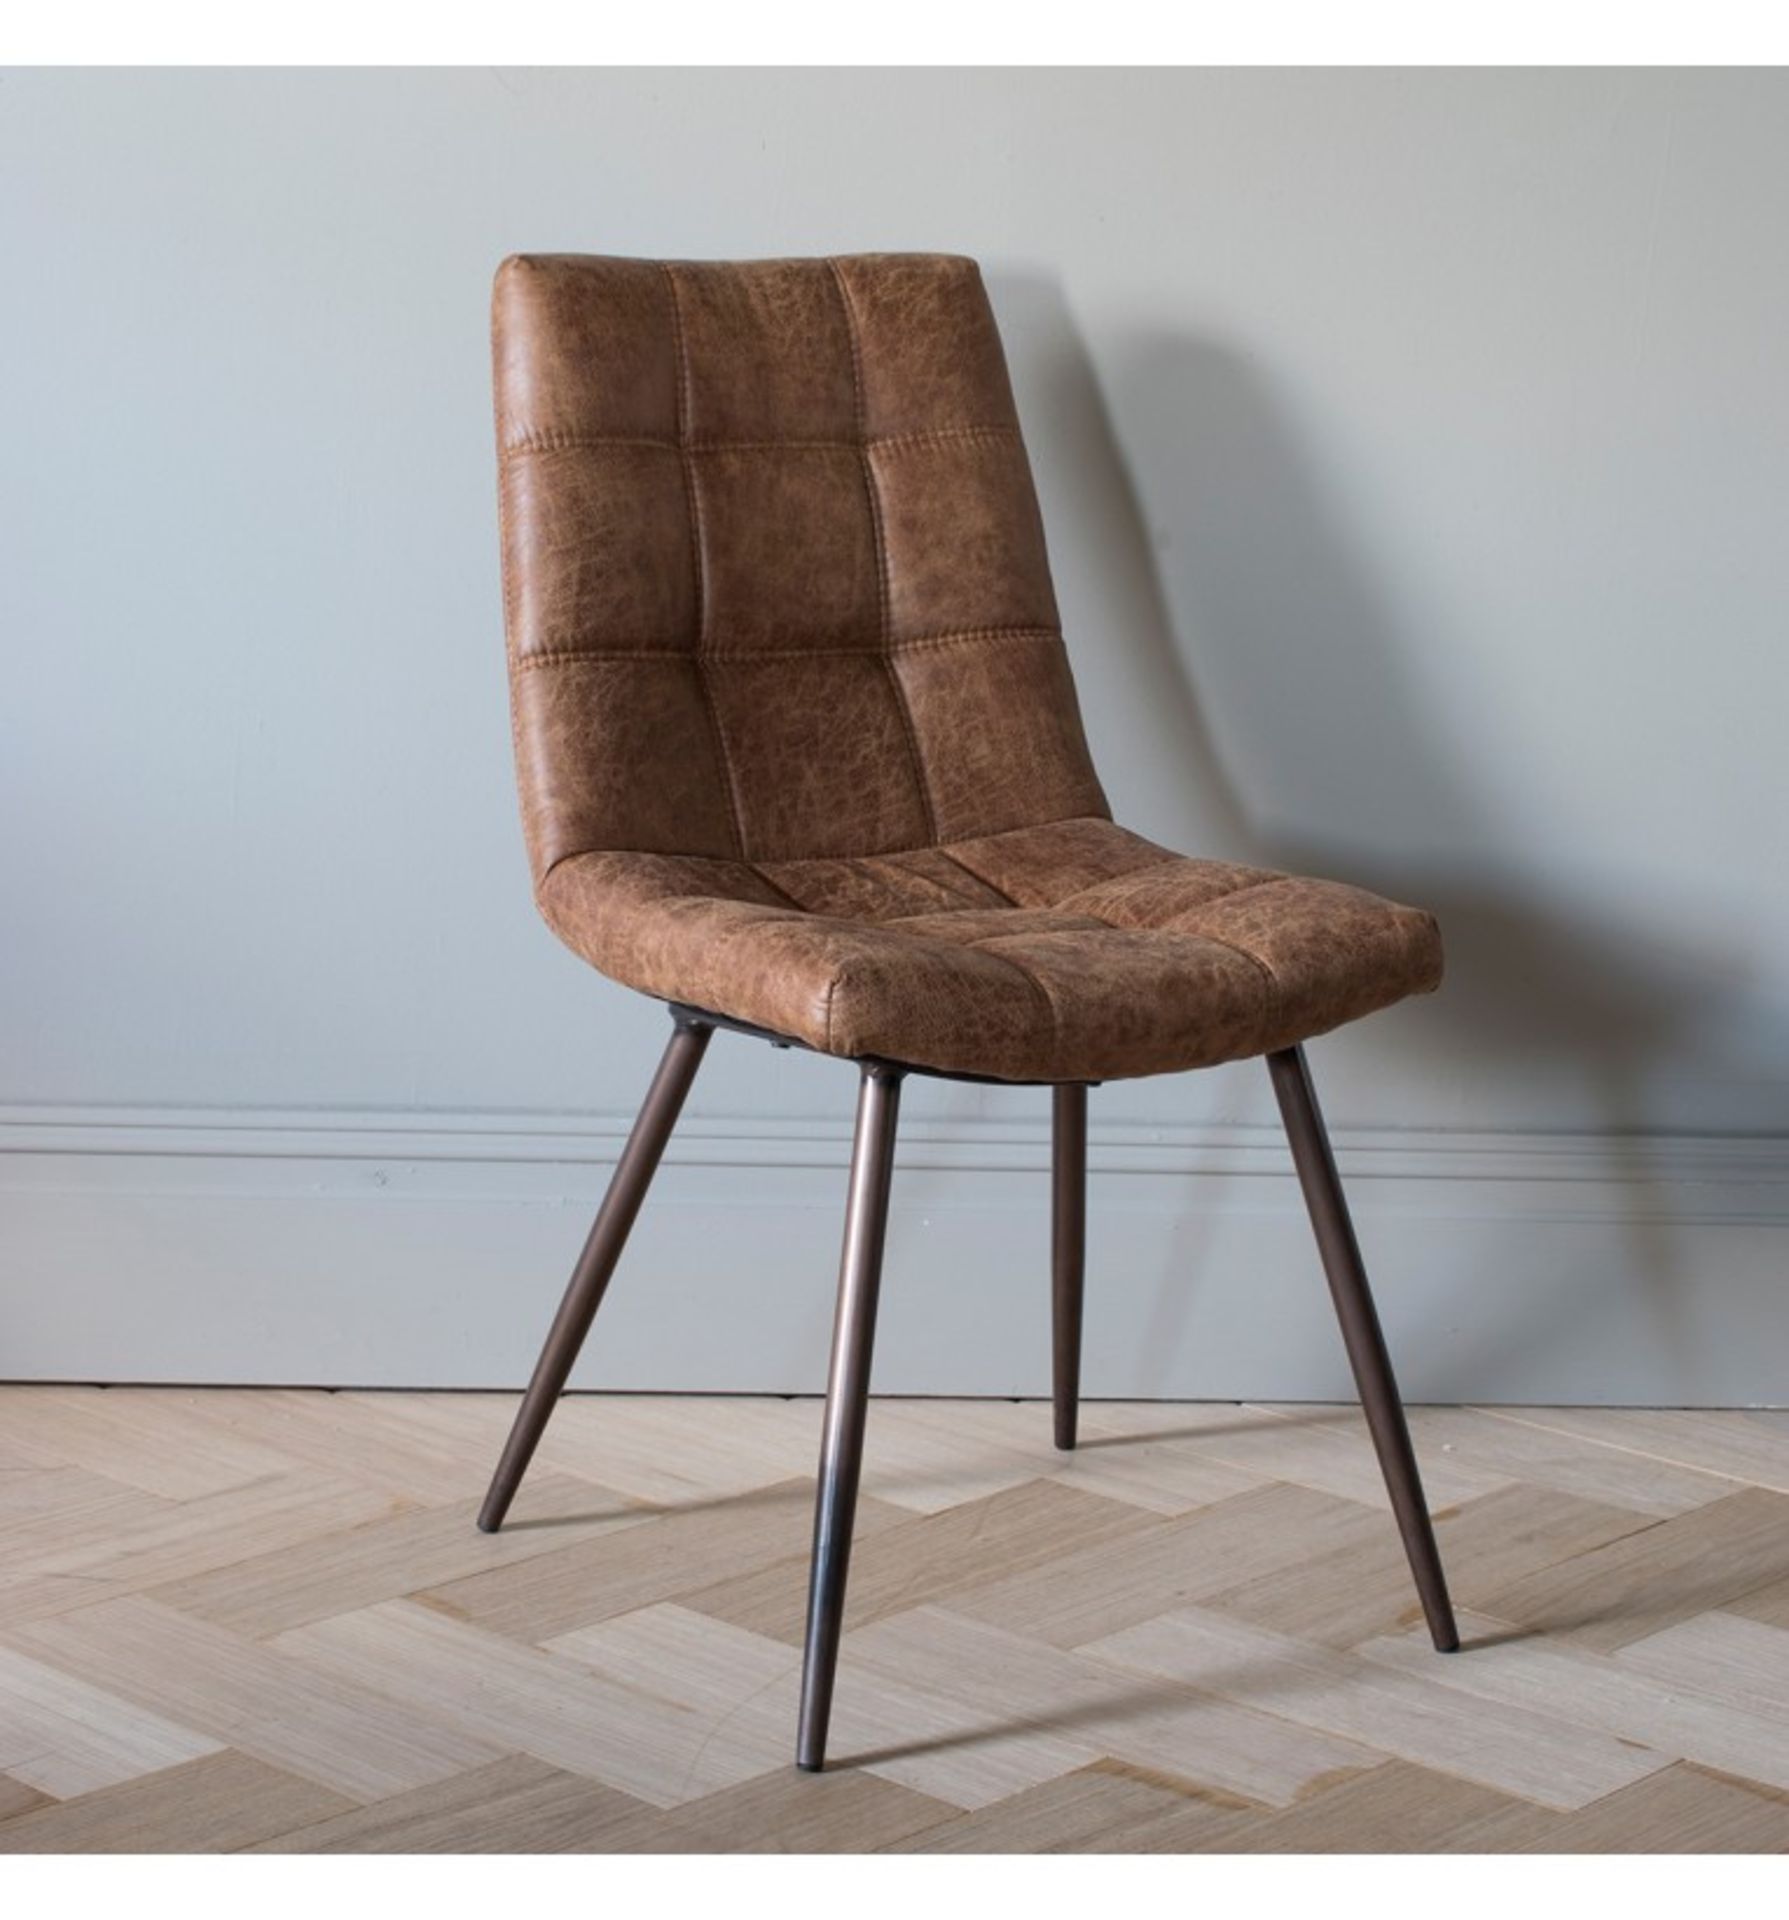 Darwin Brown Chair (2pk) We are very proud to introduce this gorgeous but simple Darwin dining